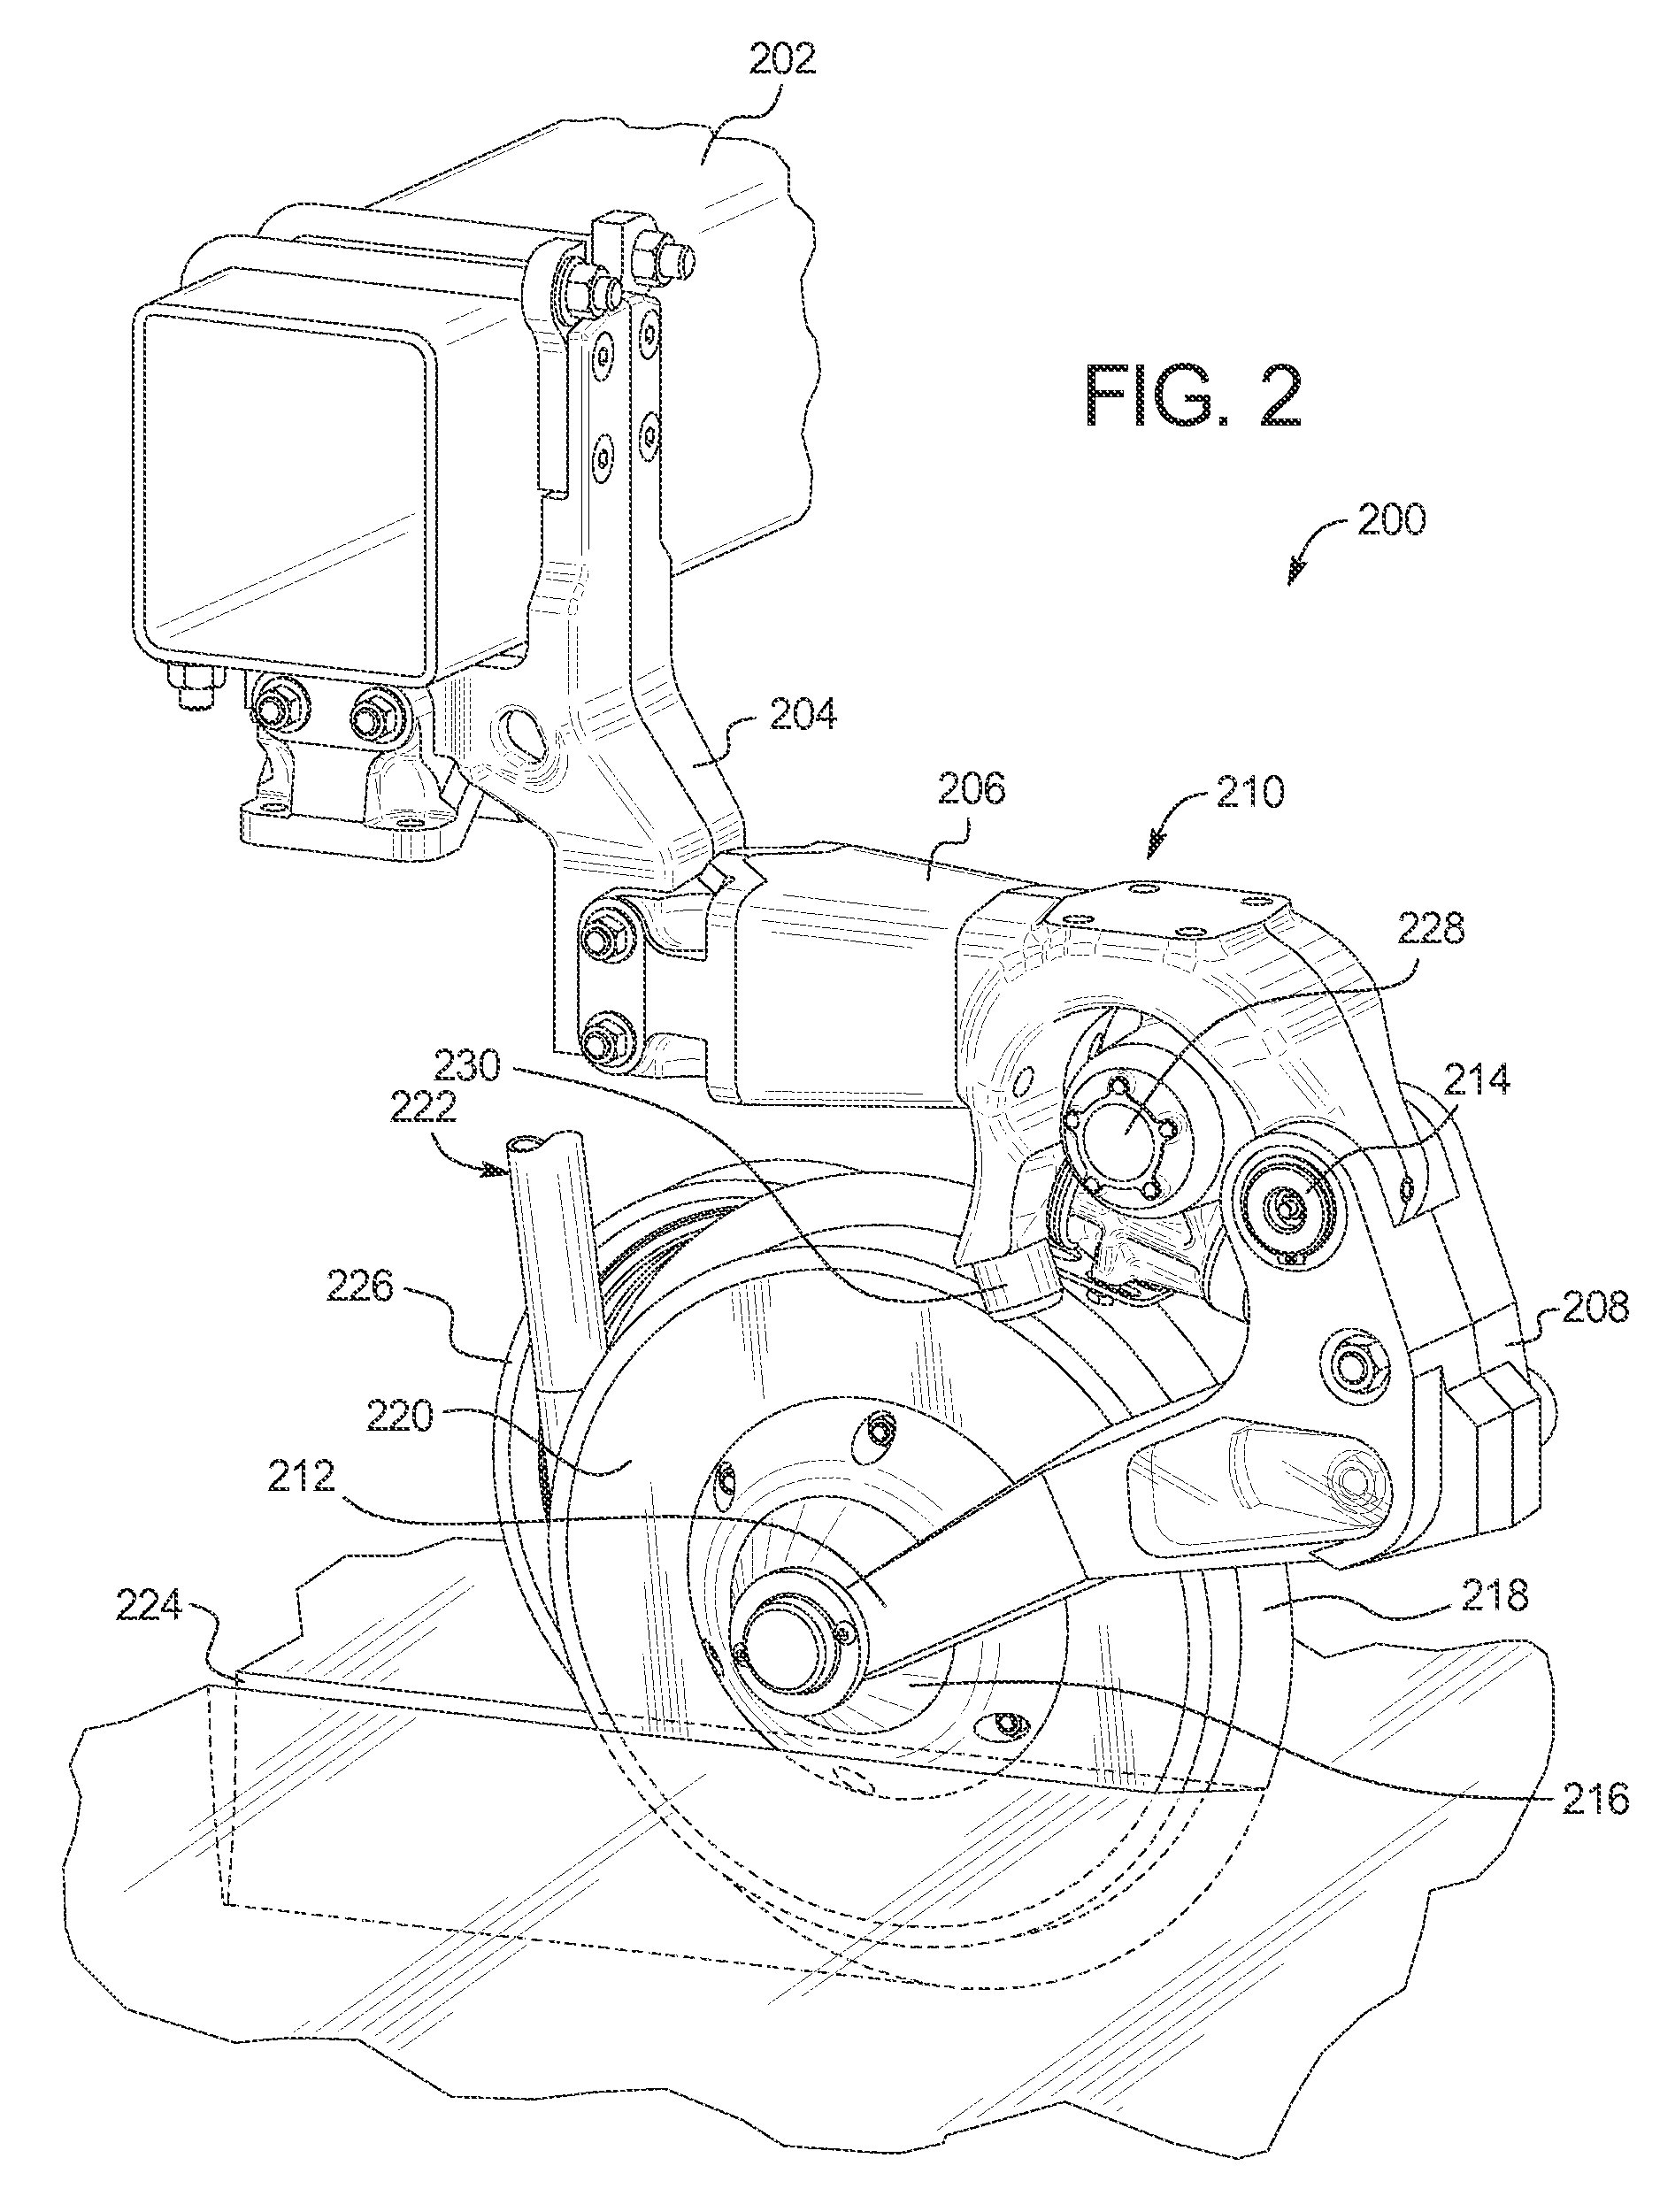 Agricultural apparatus with hybrid single-disk, double-disk coulter arrangement